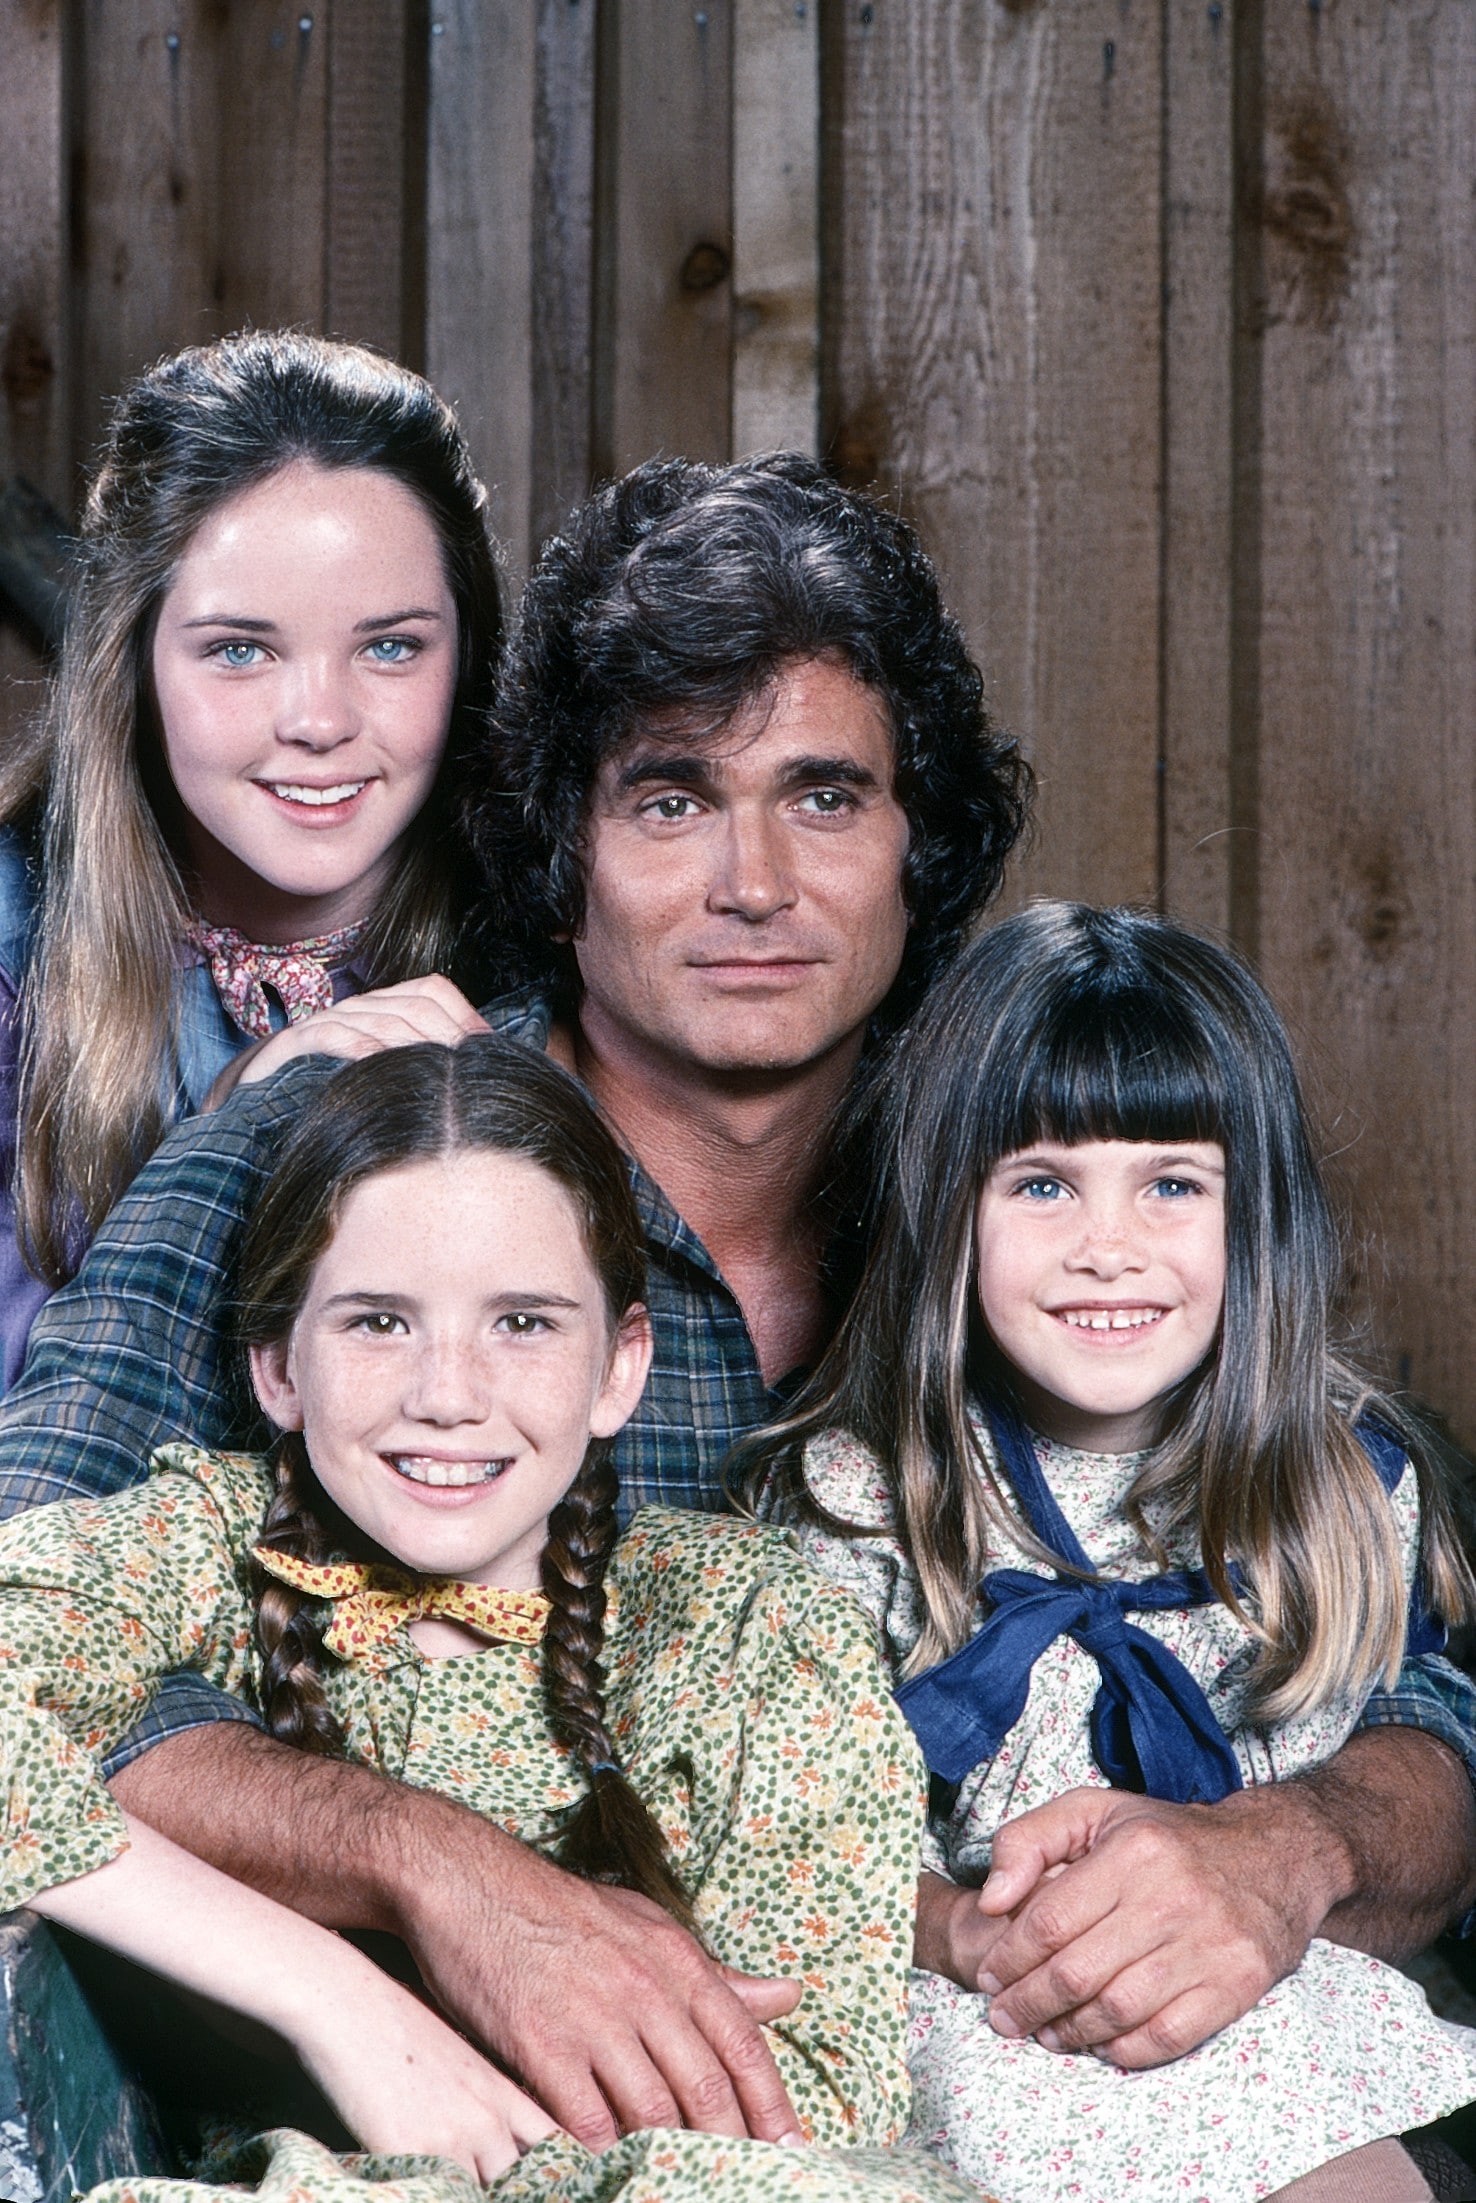 A LongAwaited 'Little House On The Prairie' Reboot Is Coming